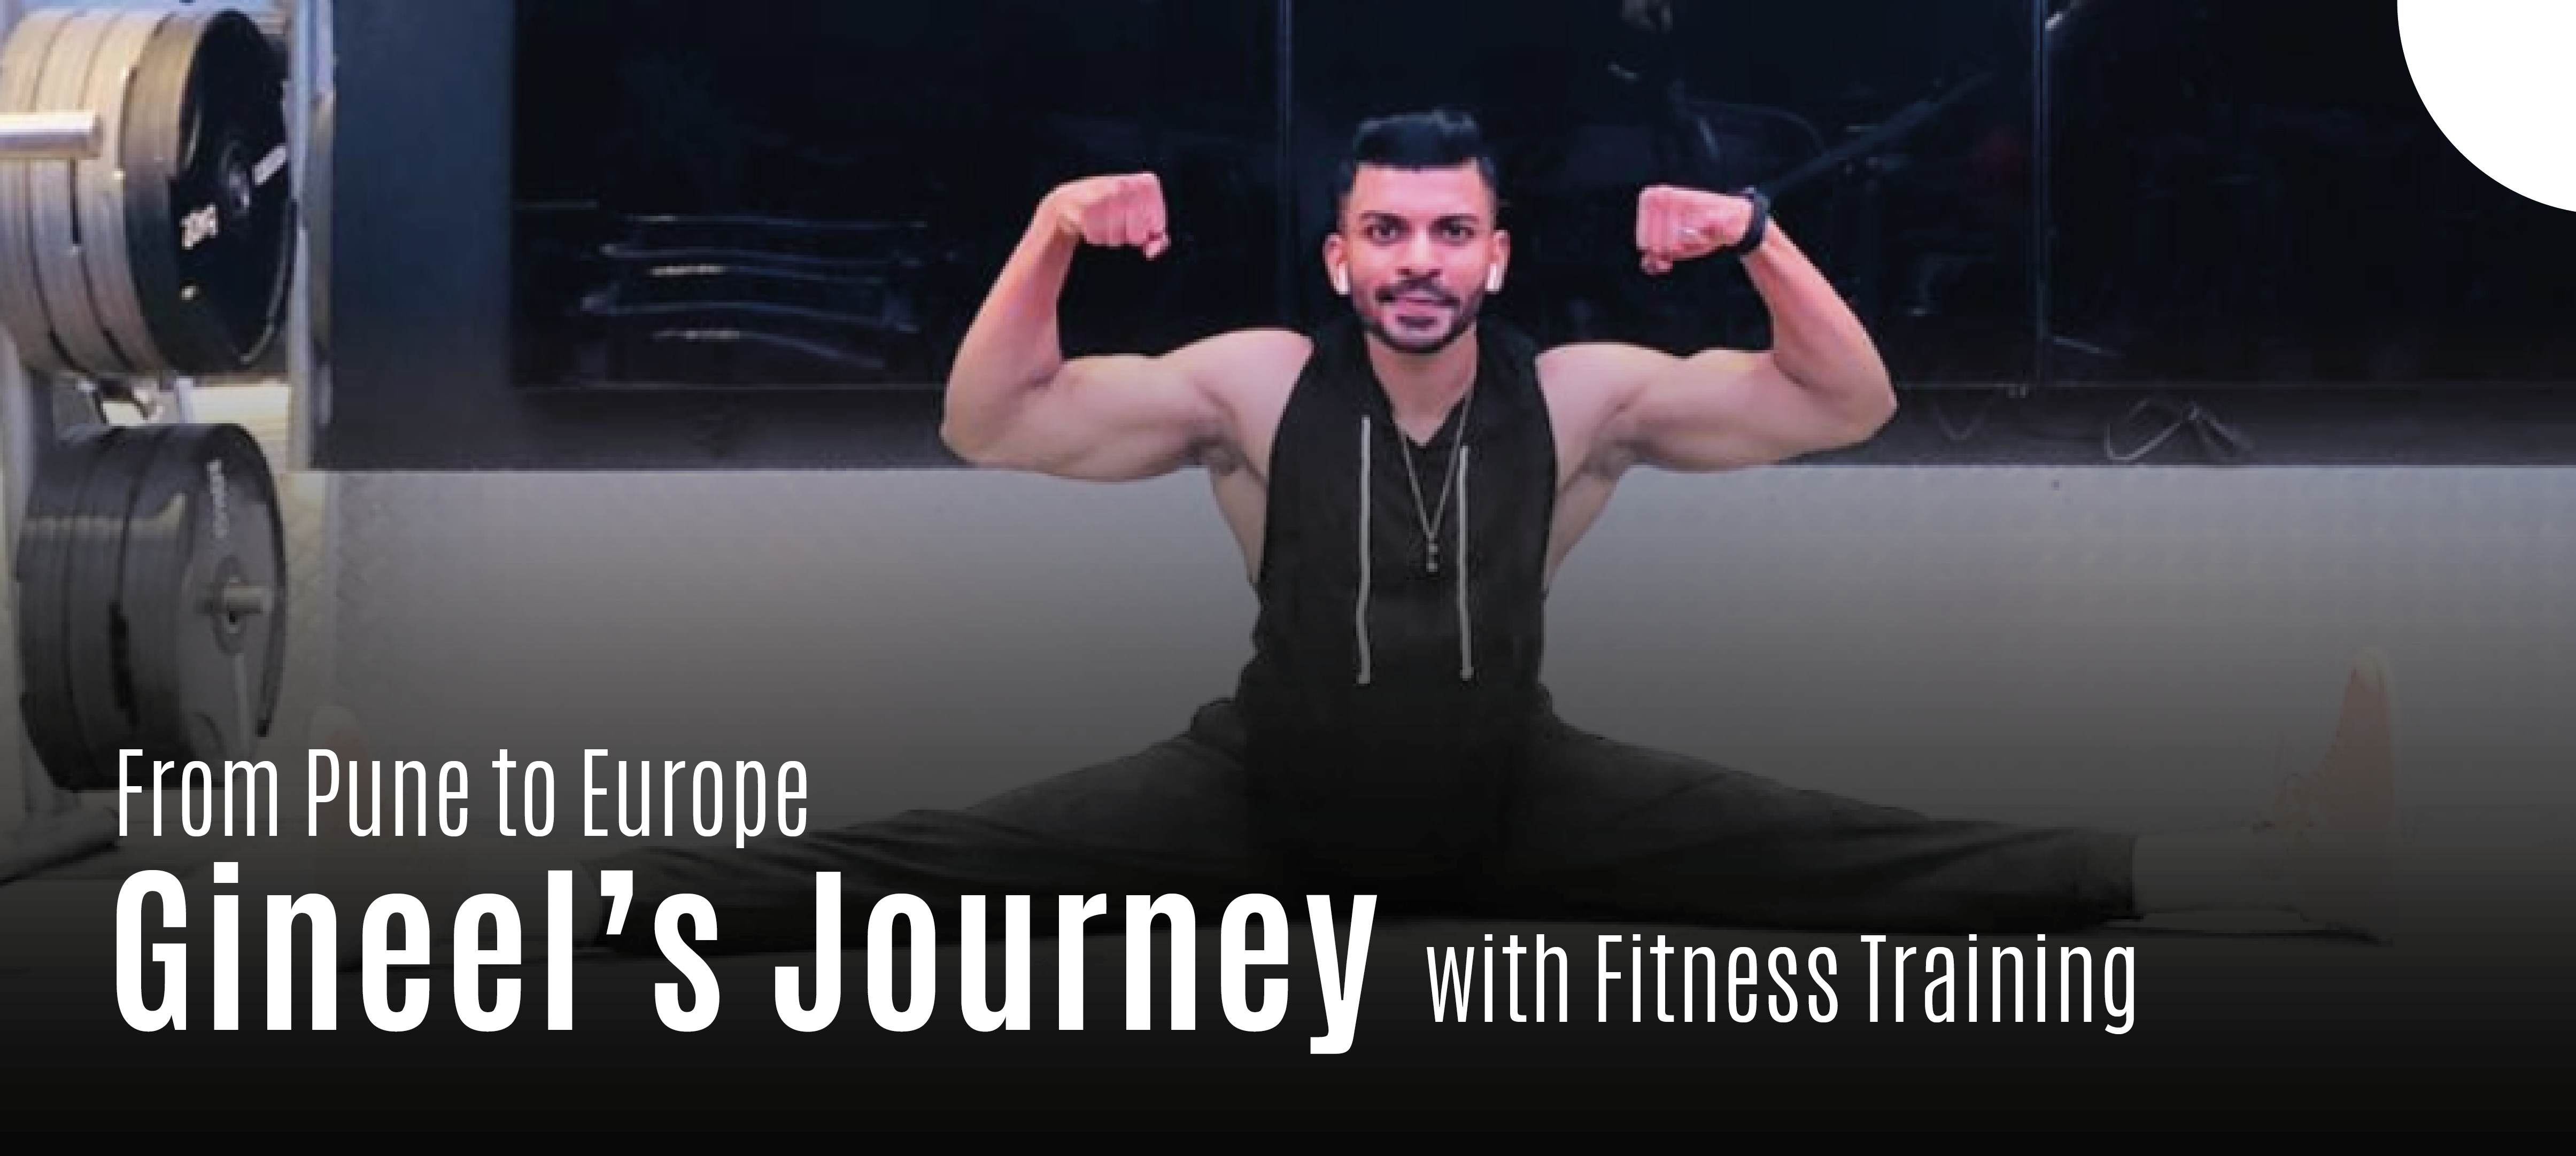 From Pune to Europe: Gineel Journey with Fitness Training